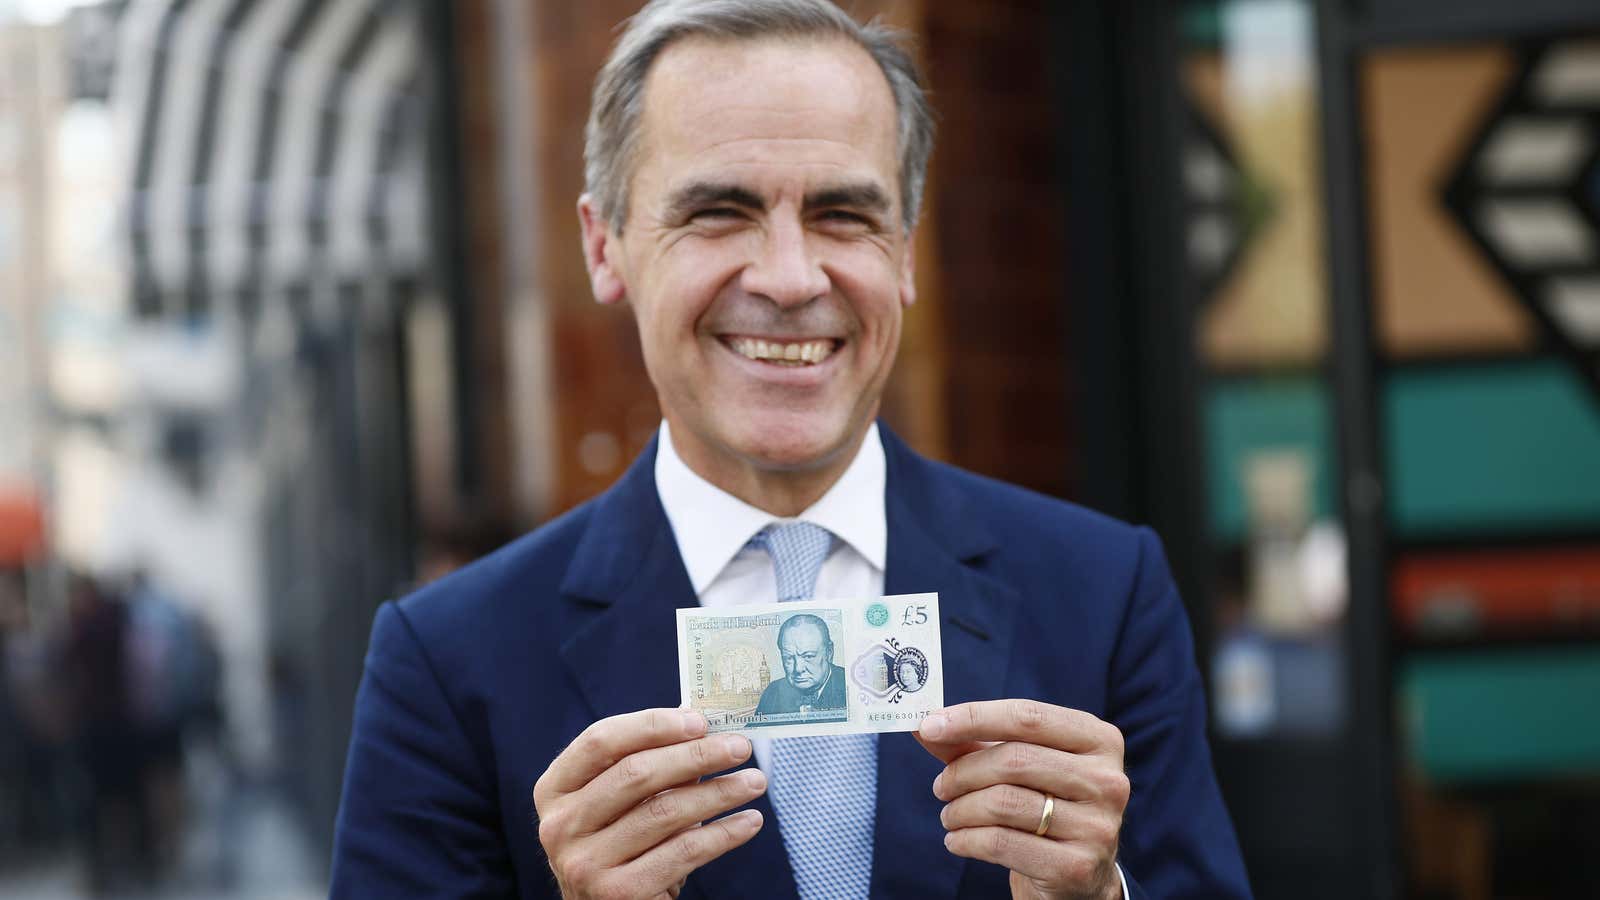 Even Mark Carney wants to move to digital coins